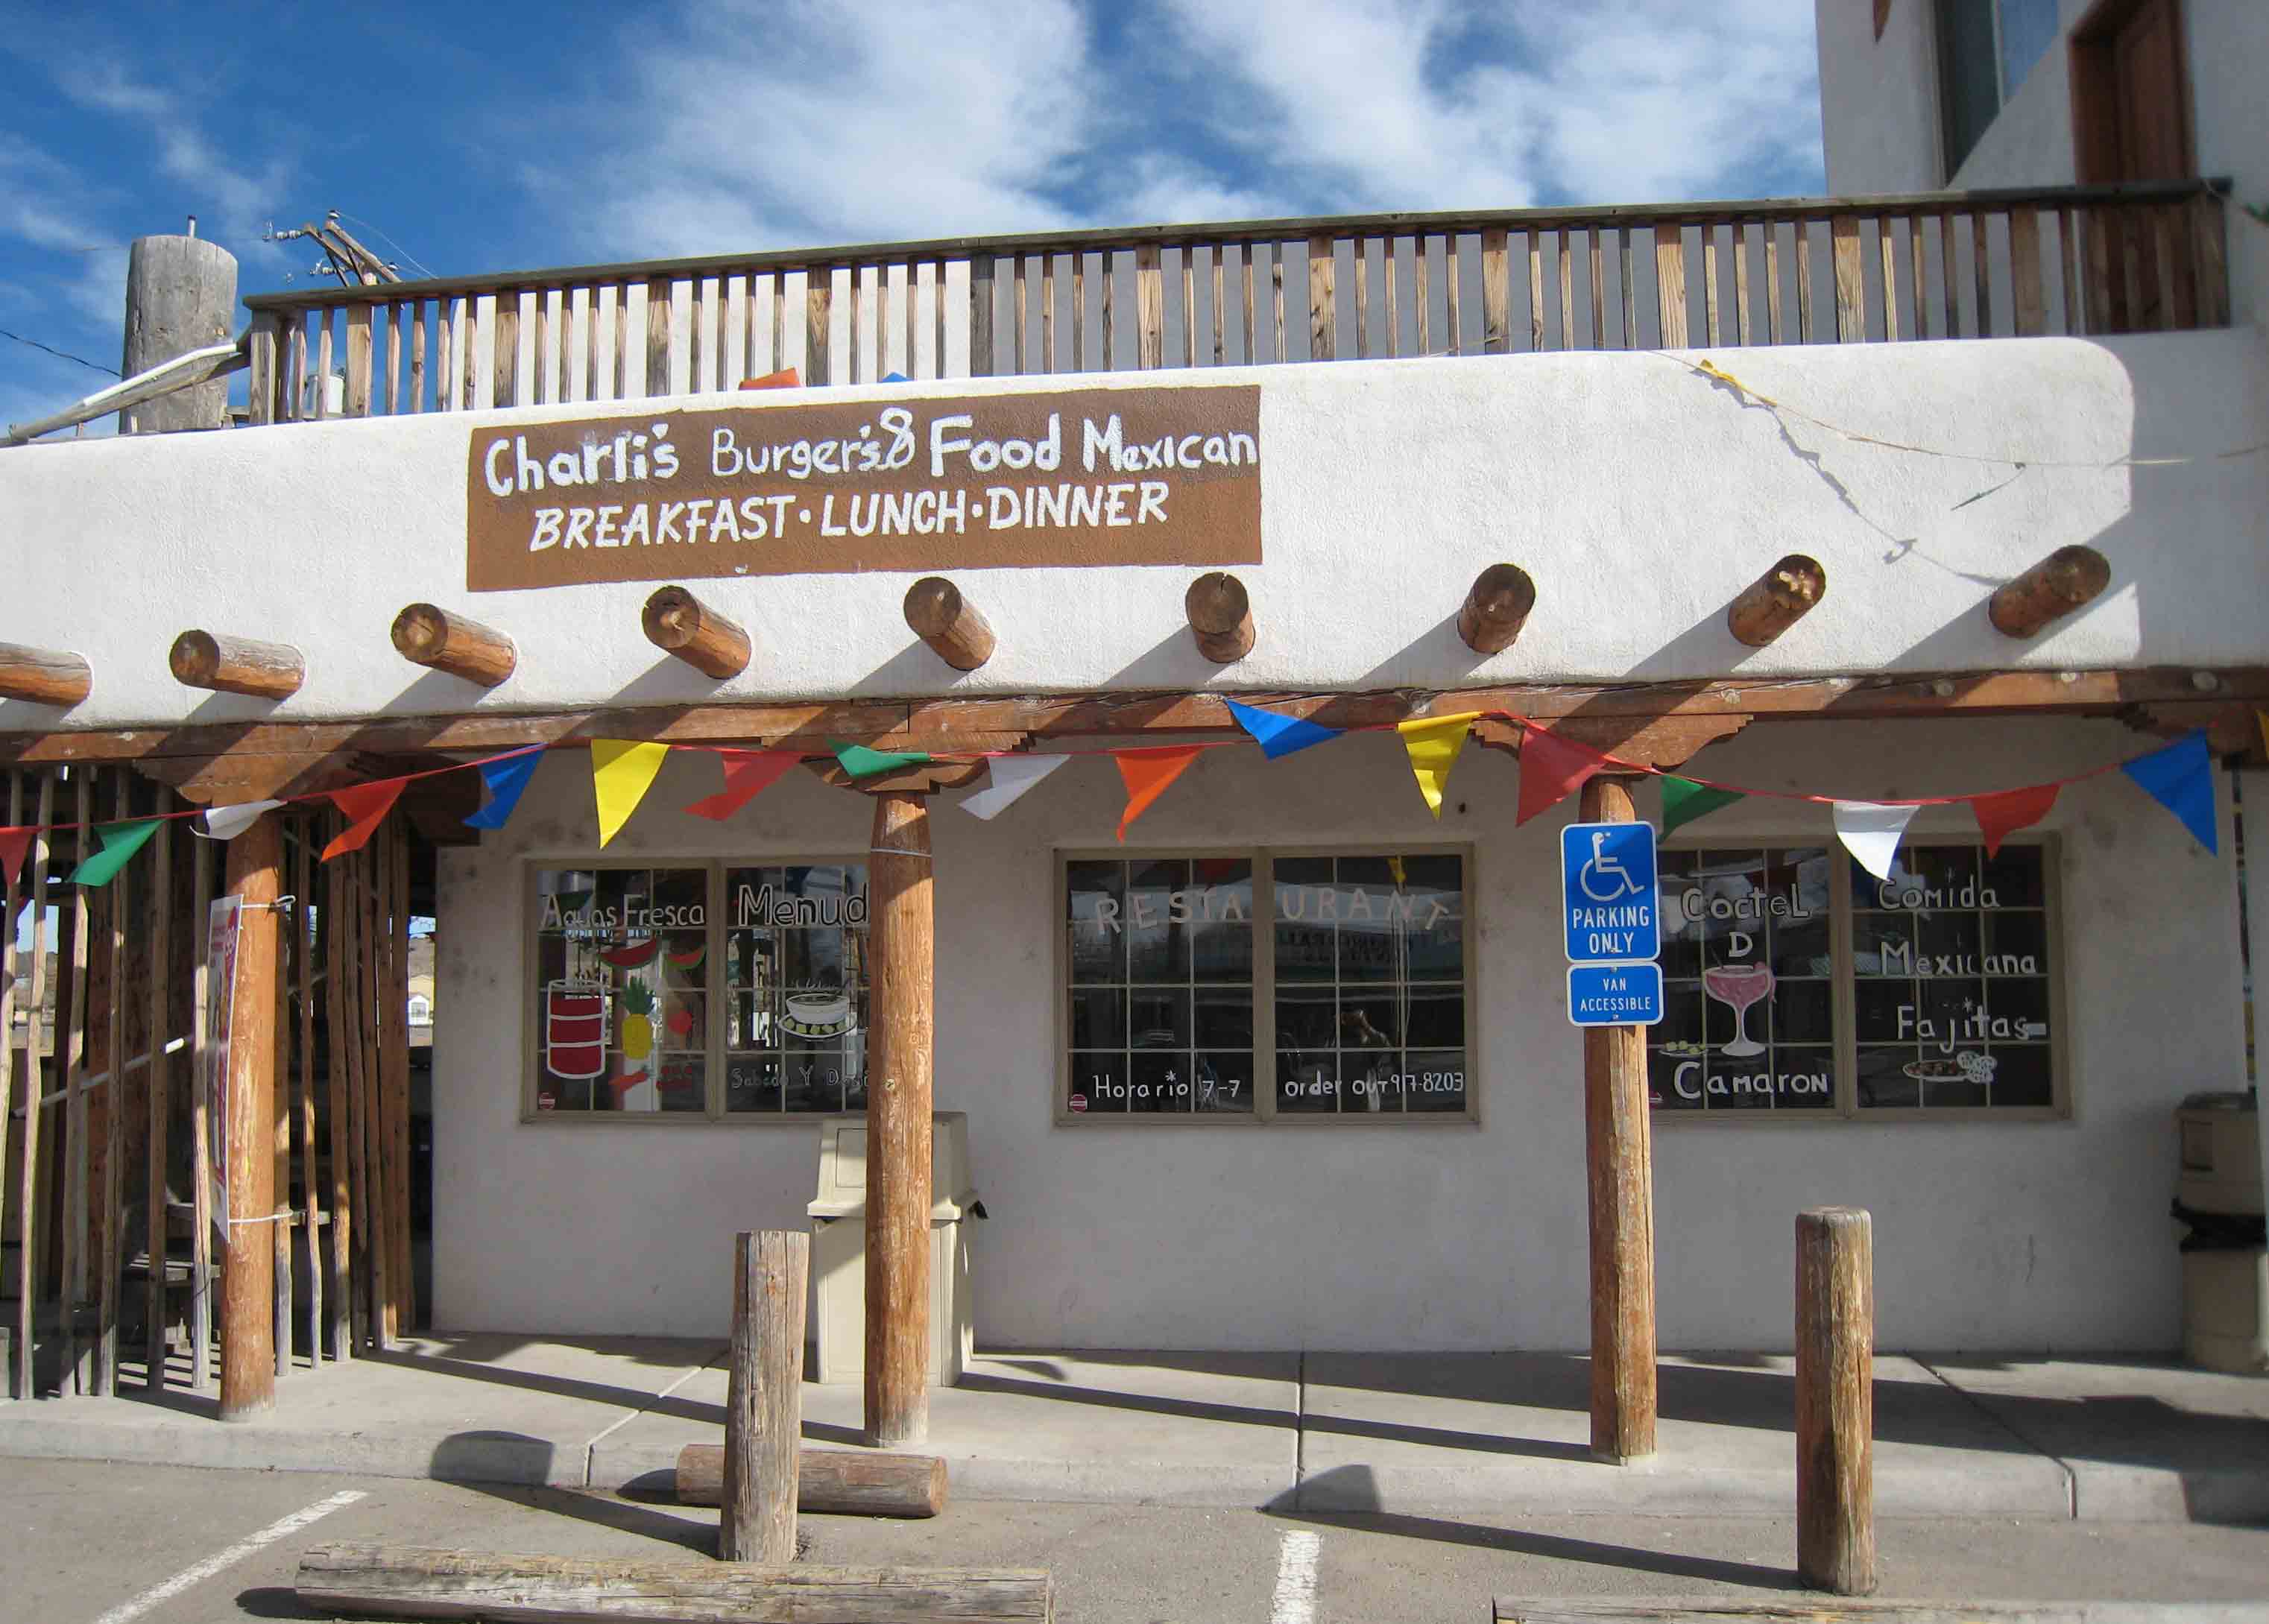 Charlie’s Burgers & Mexican Food – Bernalillo, New Mexico (CLOSED)